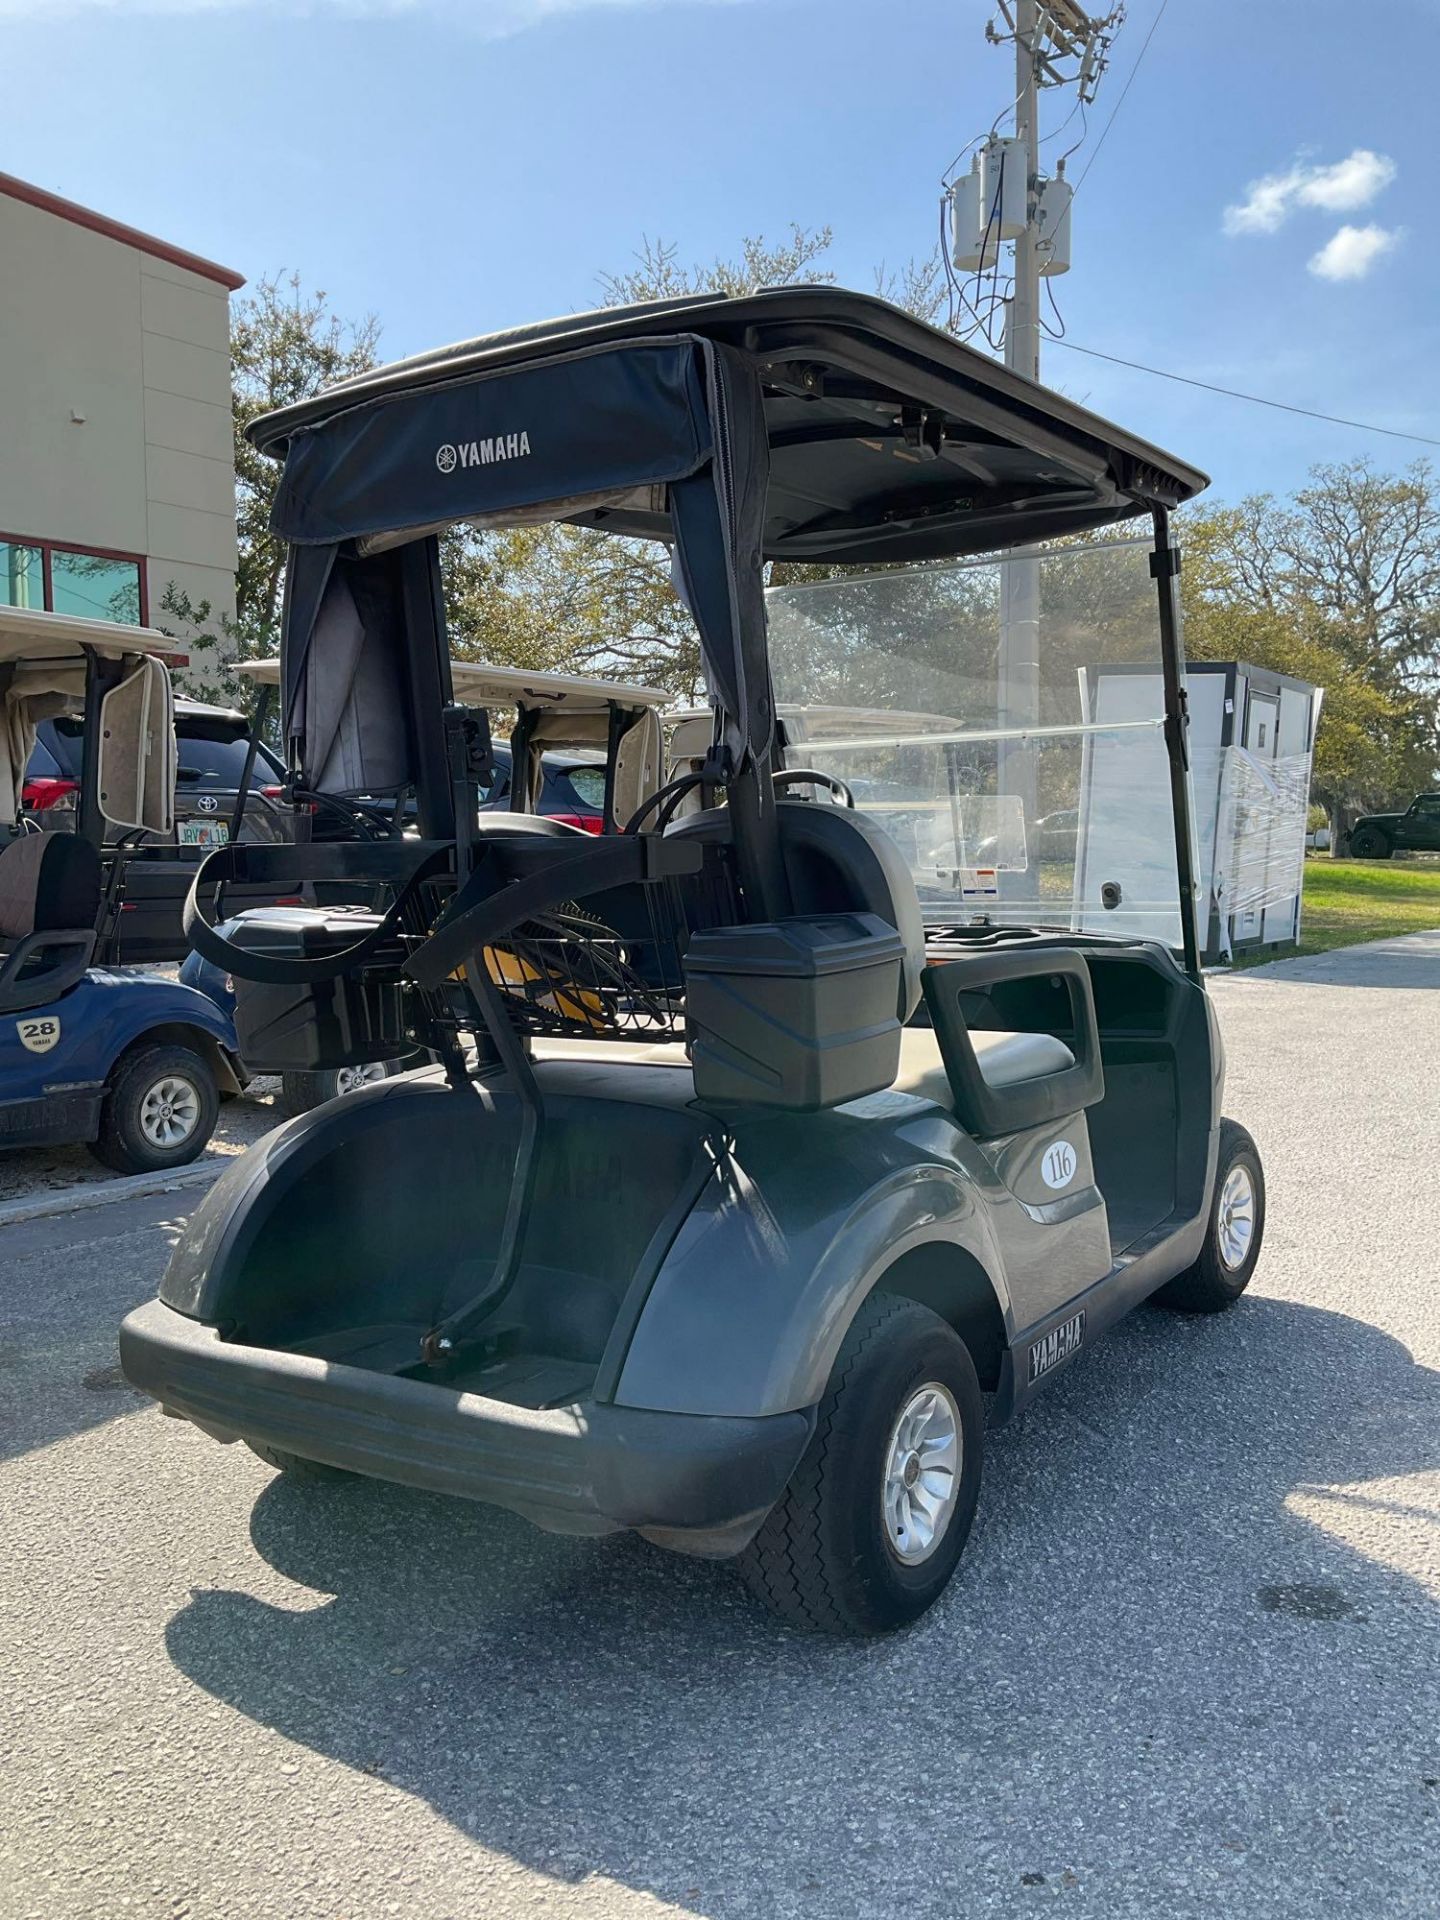 2019 YAMAHA GOLF CART MODEL DR2E19, ELECTRIC, 48VOLTS, BILL OF SALE ONLY , BATTERY CHARGER INCLUD... - Image 5 of 13